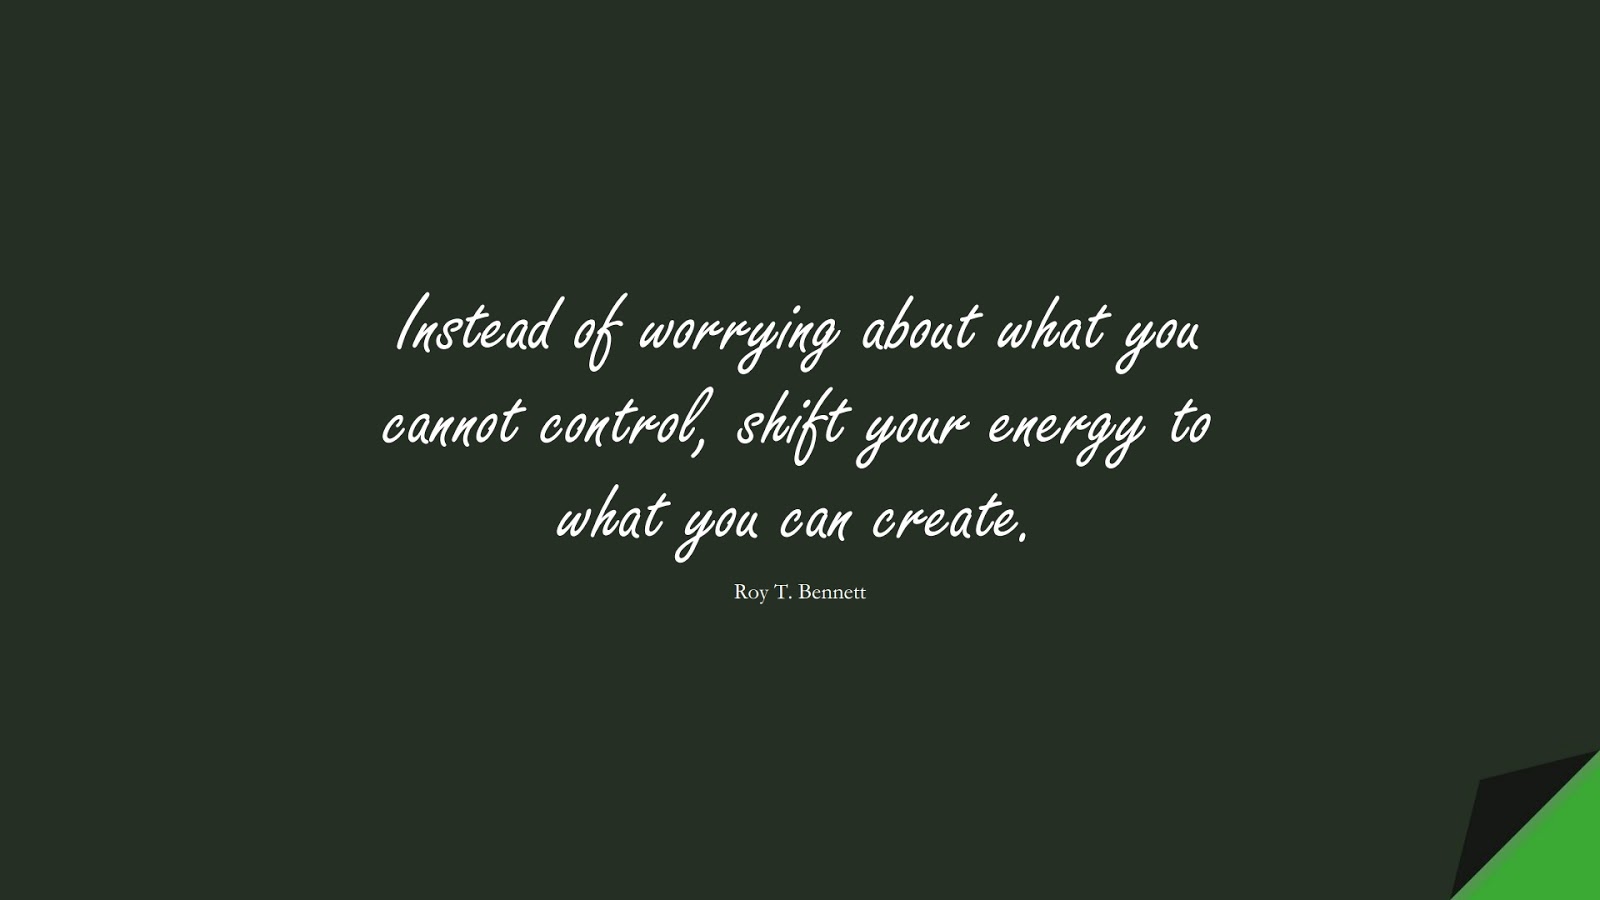 Instead of worrying about what you cannot control, shift your energy to what you can create. (Roy T. Bennett);  #PositiveQuotes